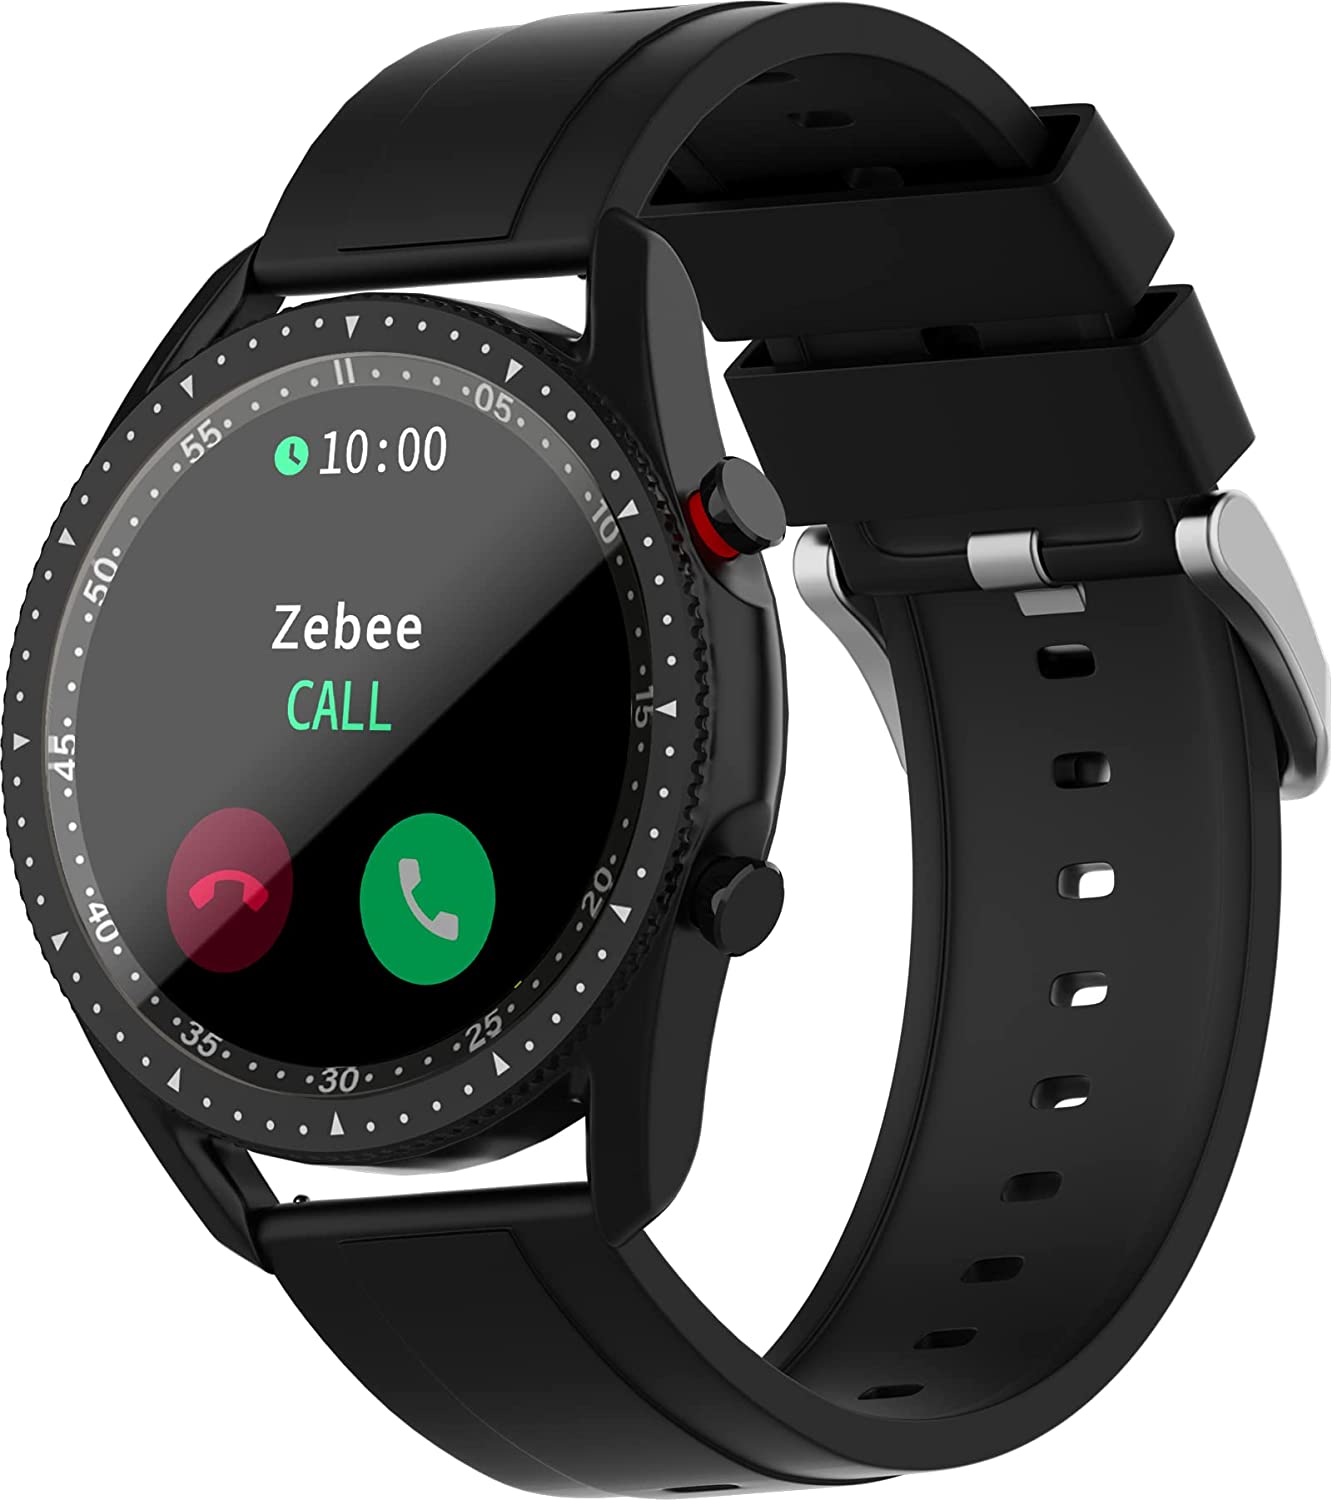 Smartwatch With Speaker And Microphone